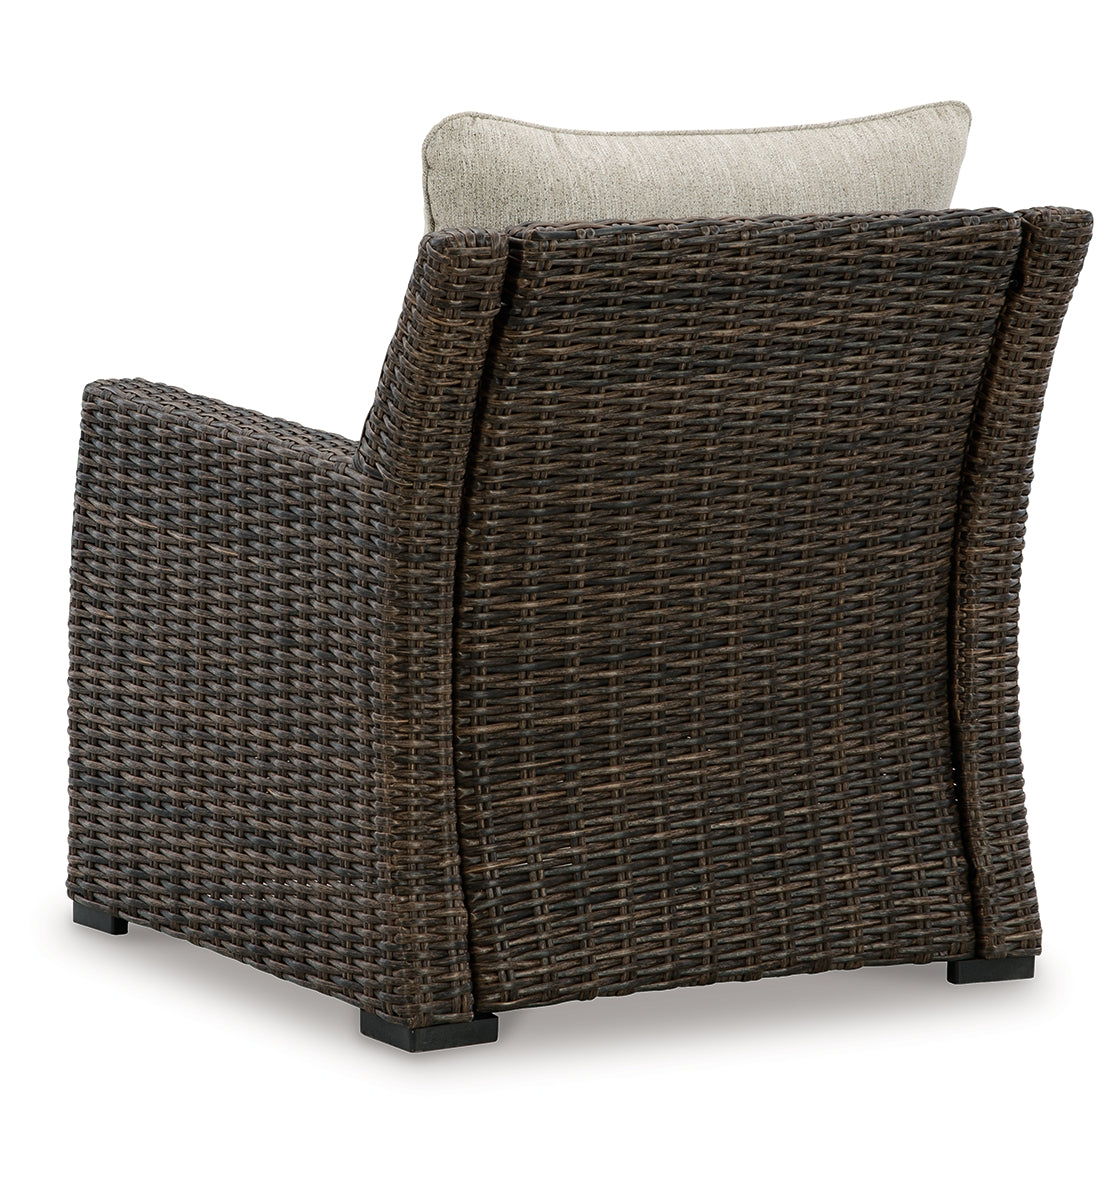 Brook Ranch Outdoor Lounge Chair with Cushion